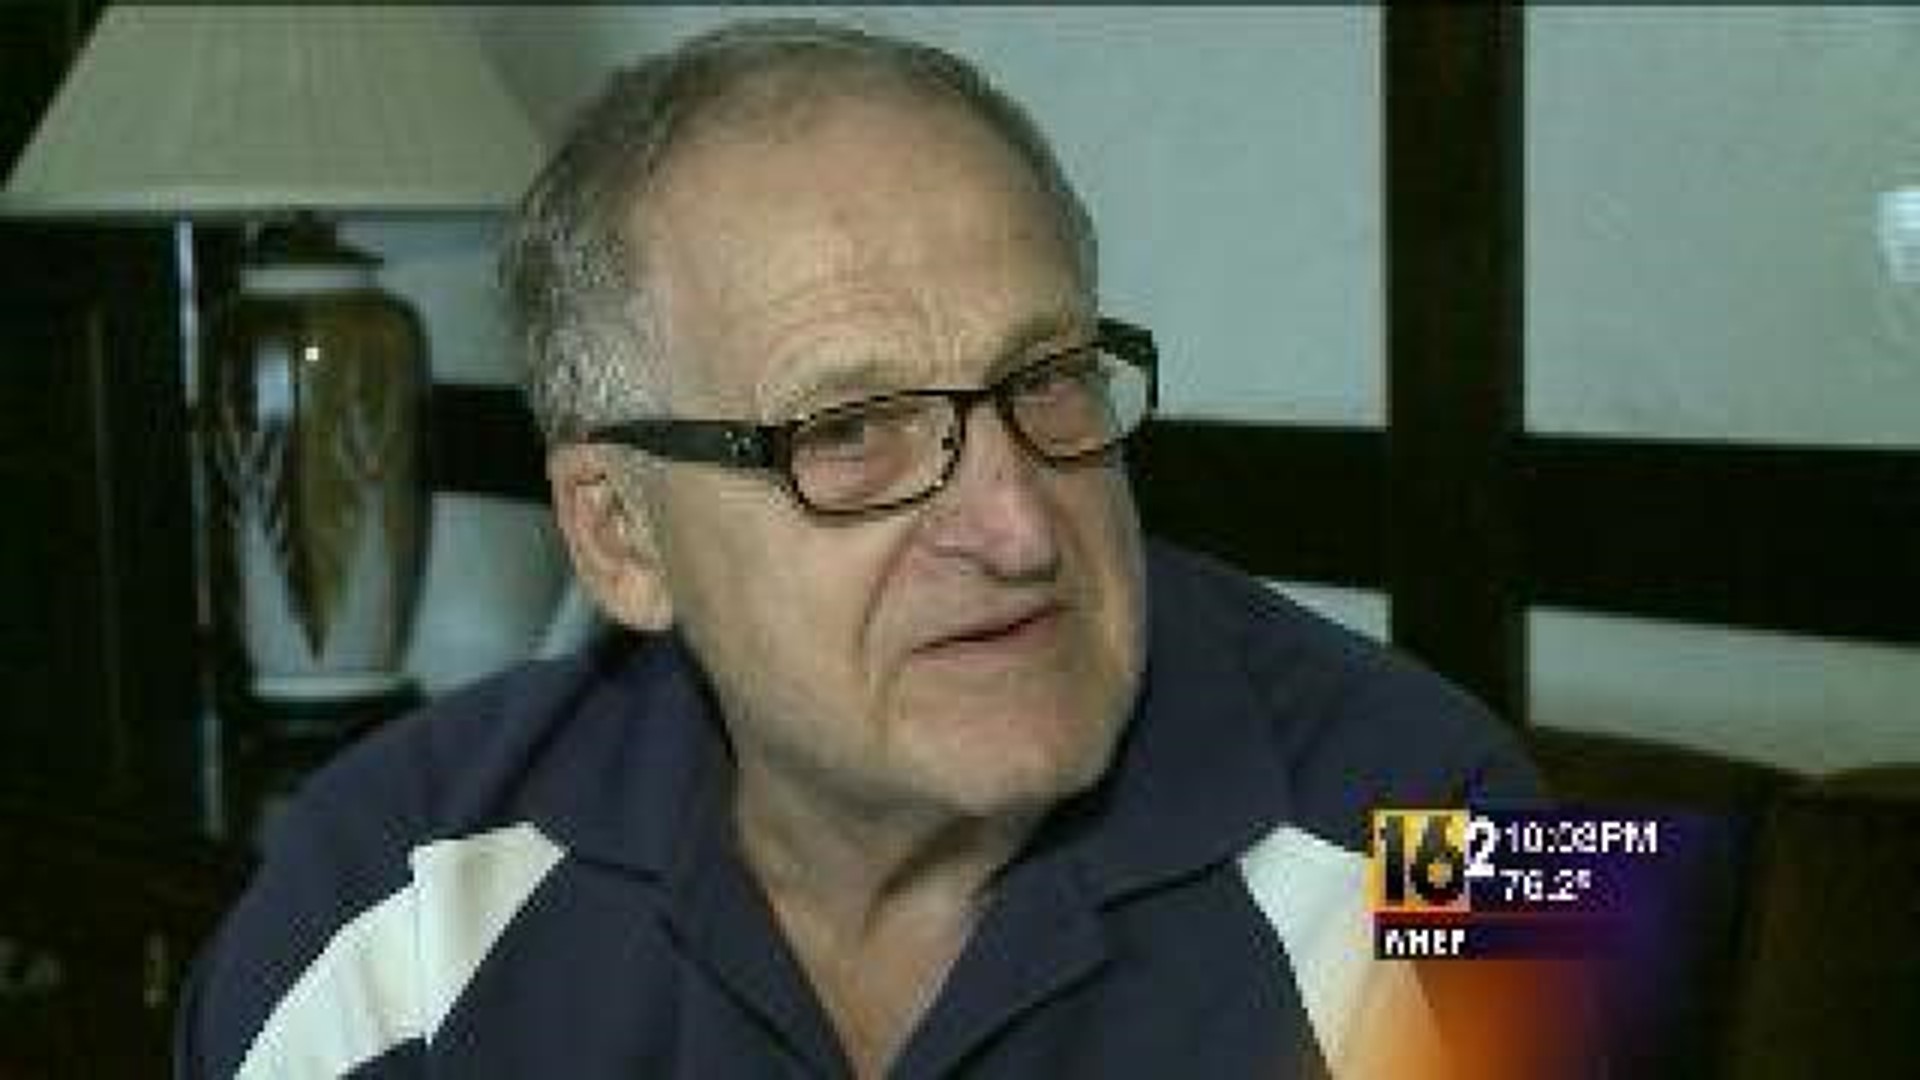 Former Nittany Lion Reacts to JoePa’s Column